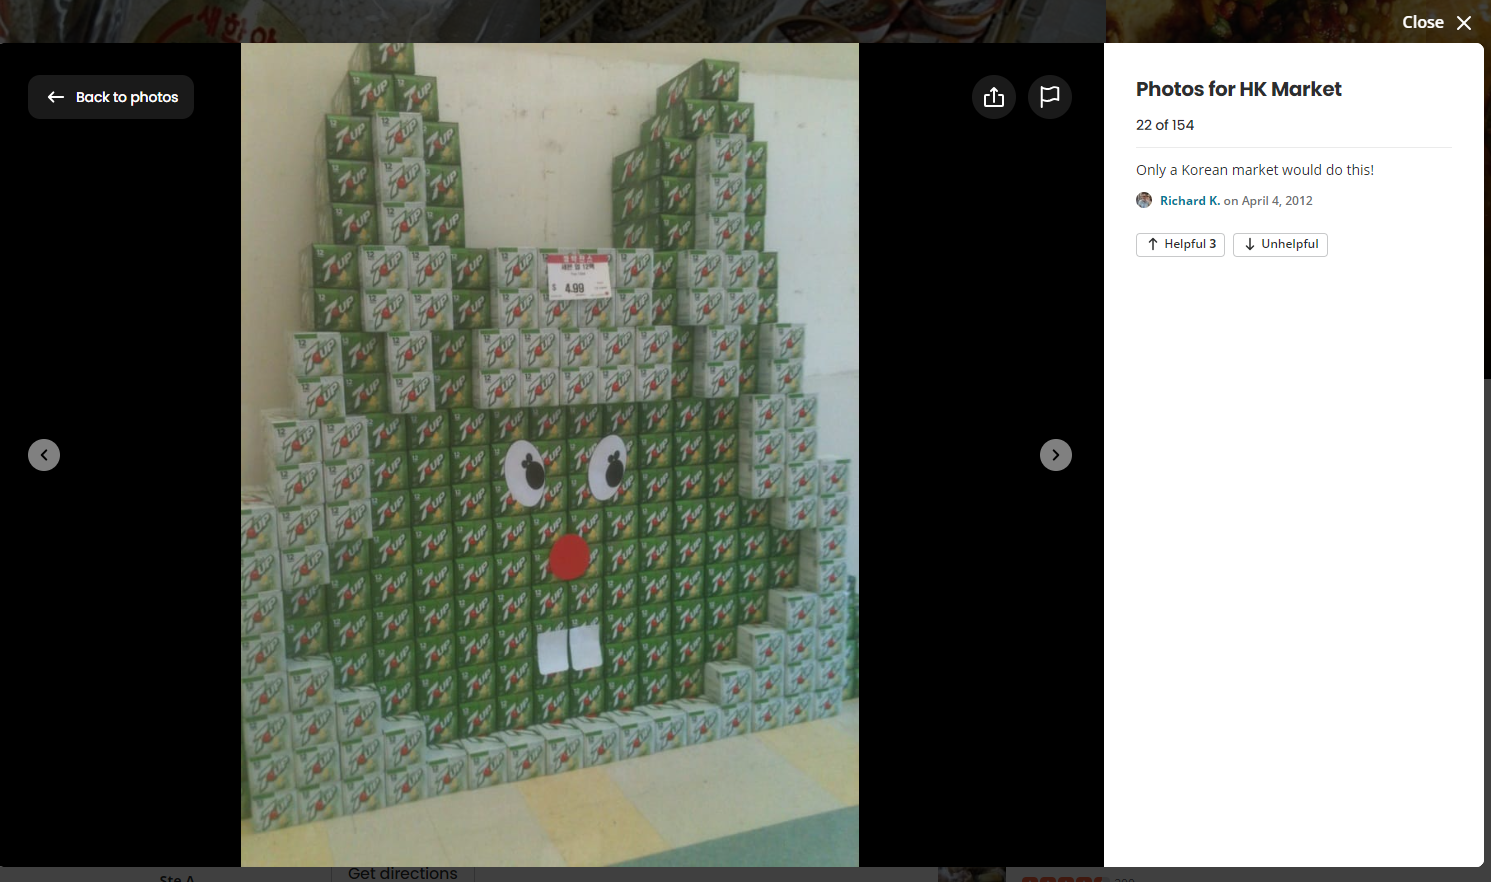 A bunny's face is created out of boxes of 7-up Soda Cans.